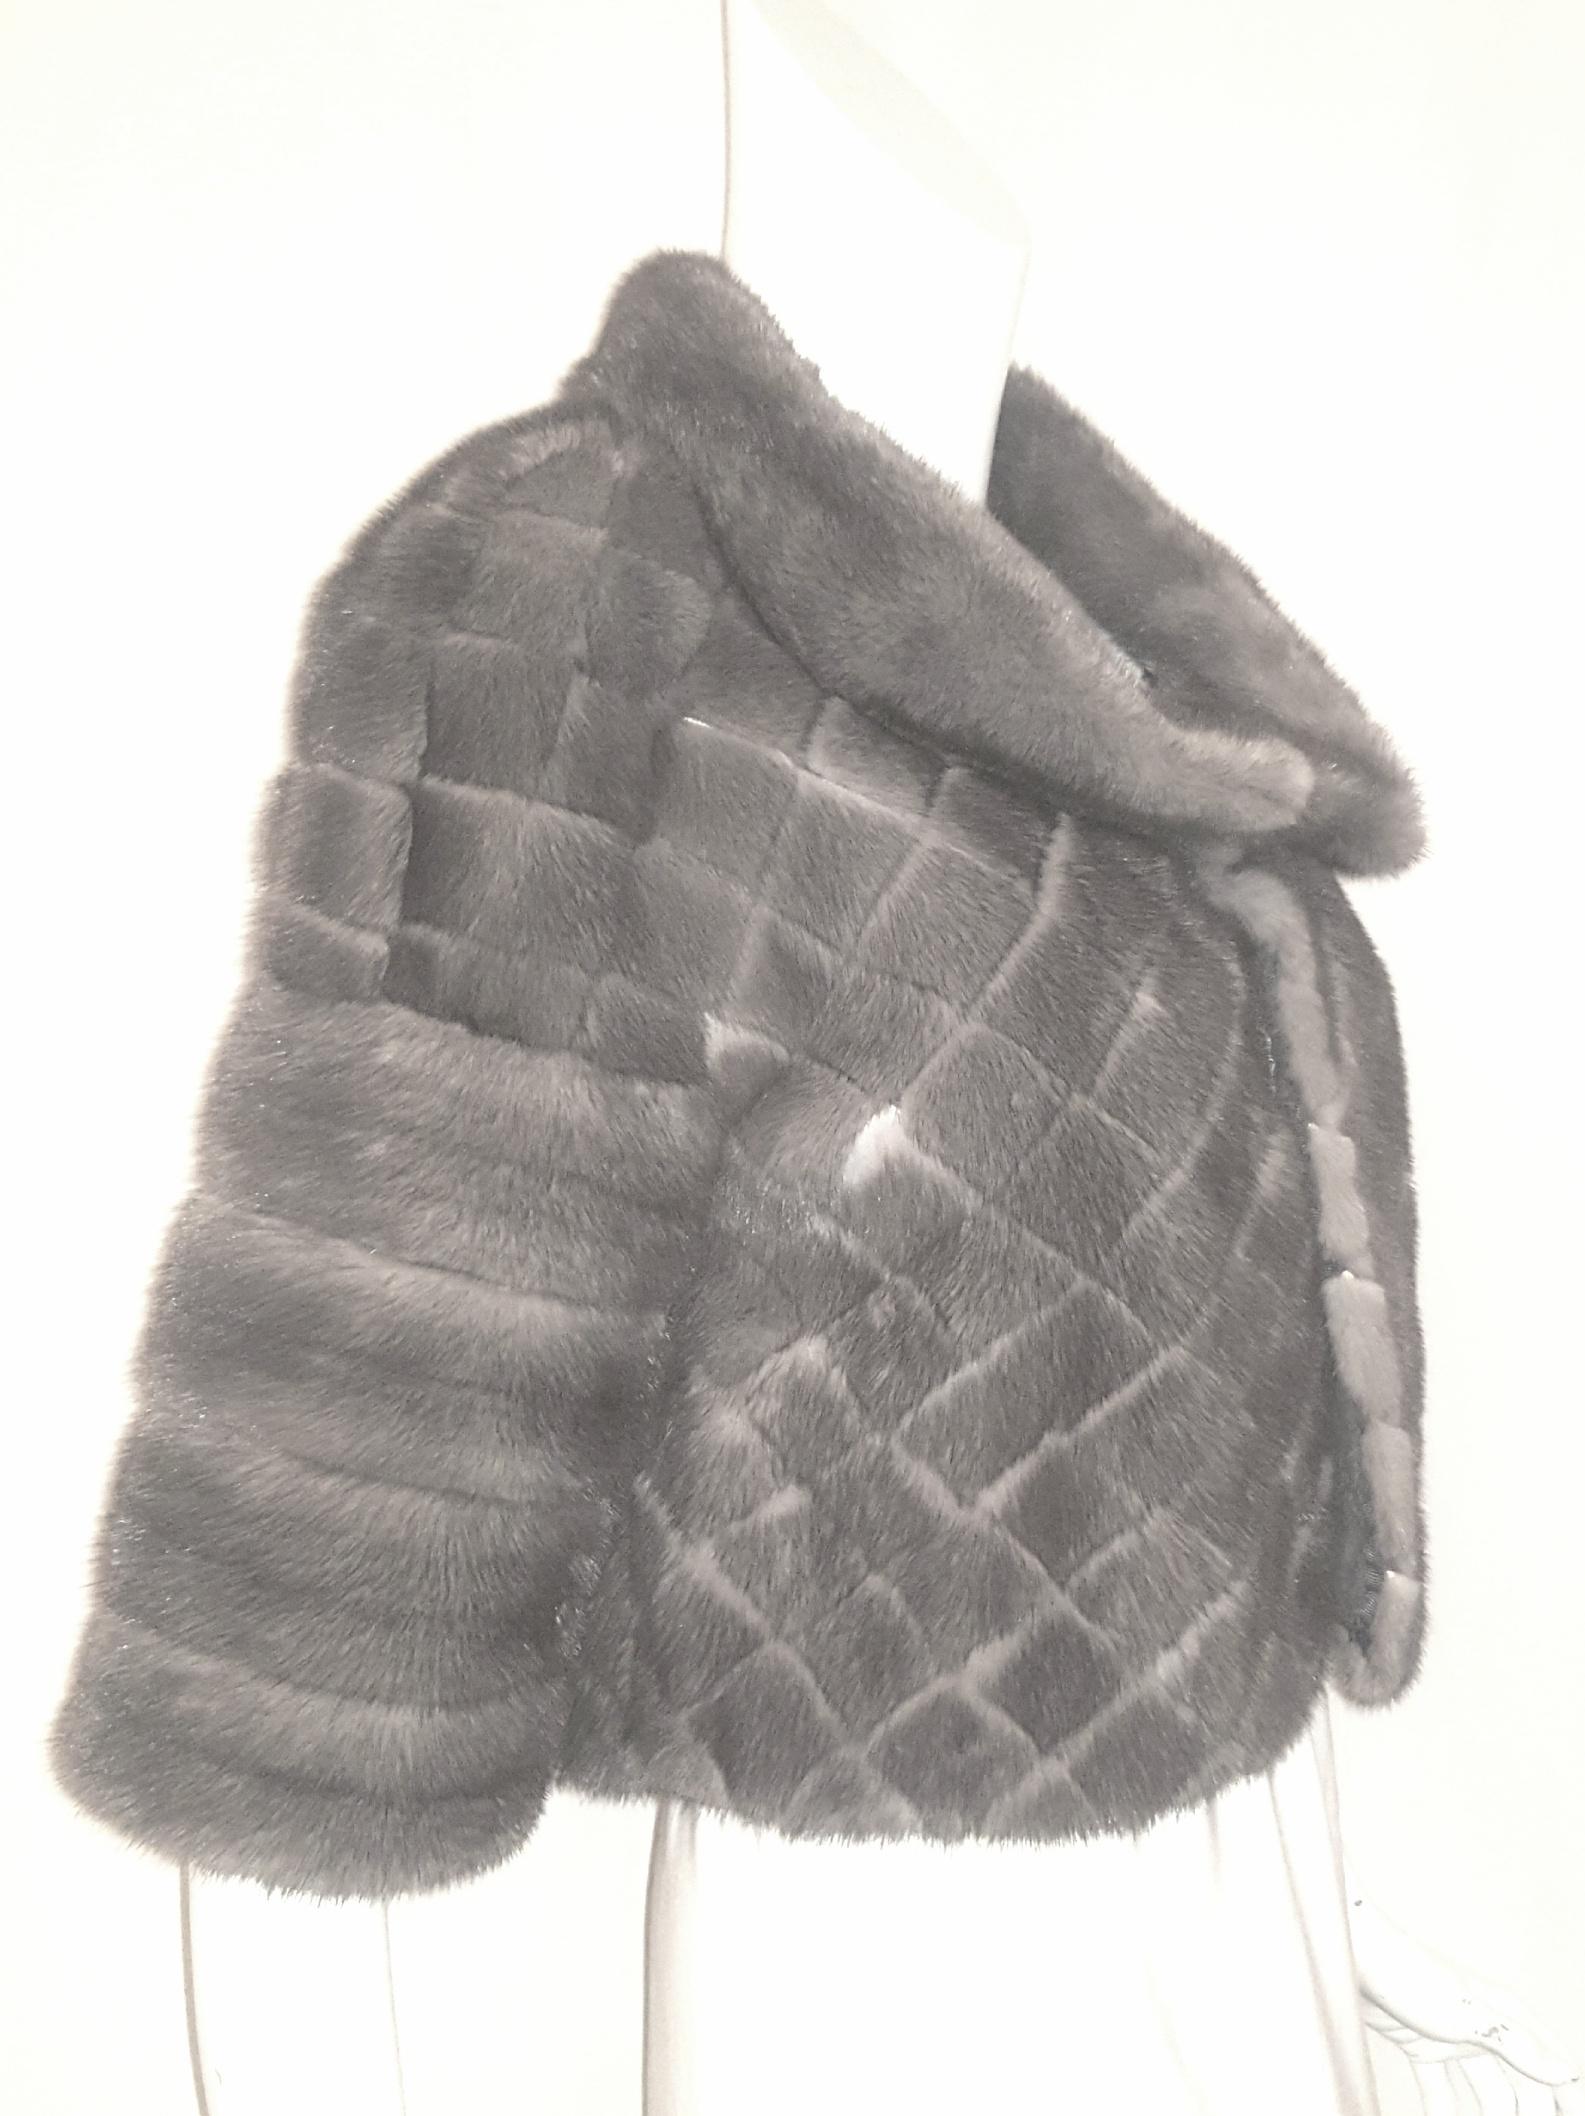 Oscar de la Renta was one of the most celebrated designers of the 20th Century.  This Sterling Mink Jacket illustrates why De la Renta was chosen to design Balmain haute couture!  Jacket features ultra-luxurious mink that has been precisely cut into